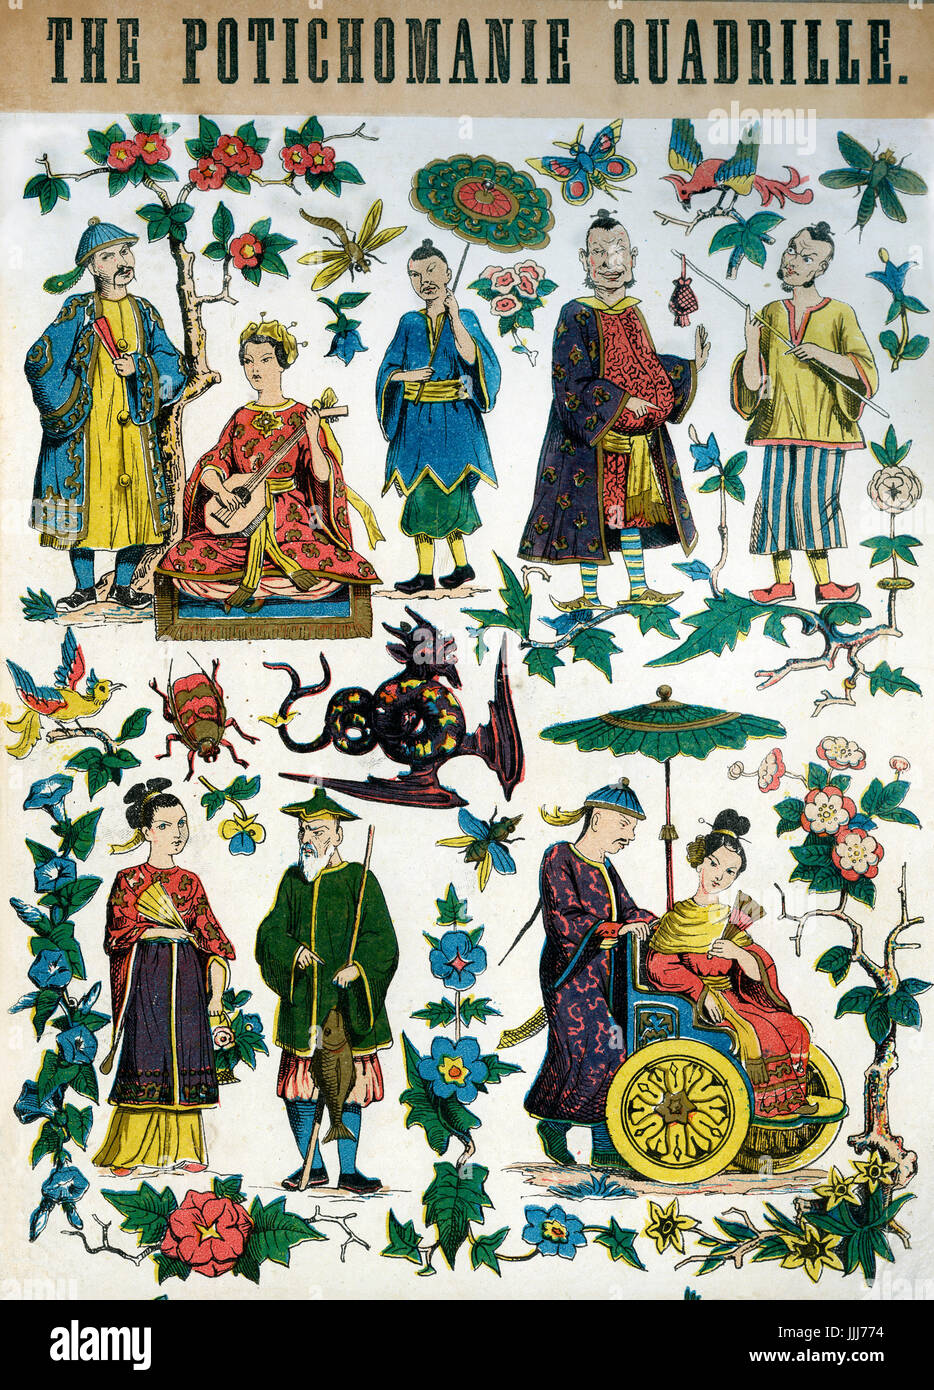 The Potichomanie Quadrille. Cover to Victorian score, featuring Chinese aristocrats, servants, musicians playing Ruan, fisherman and merchants. Also featured are ornamental butterlies, birds, insects, flowers, and a central dragon. Stock Photo